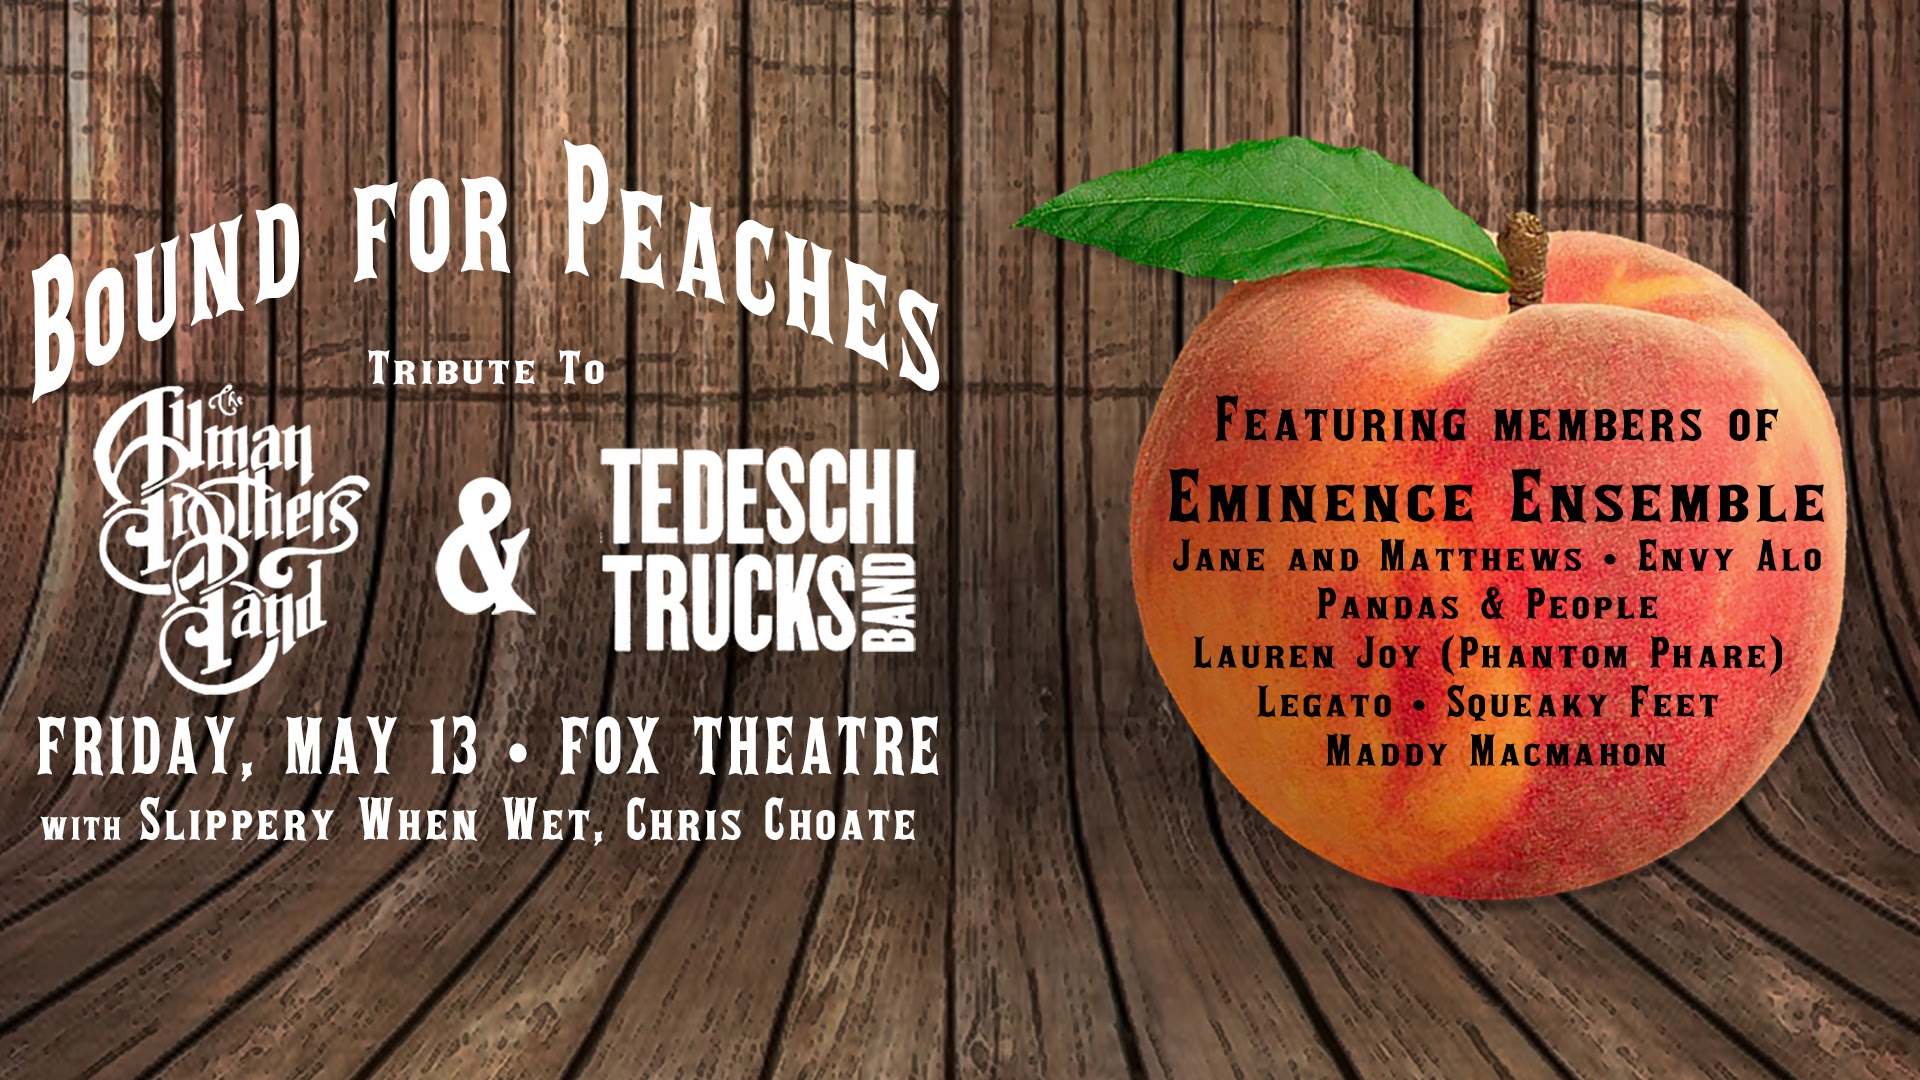 Bound for Peaches to play The Fox Theatre - May 13th, 2022